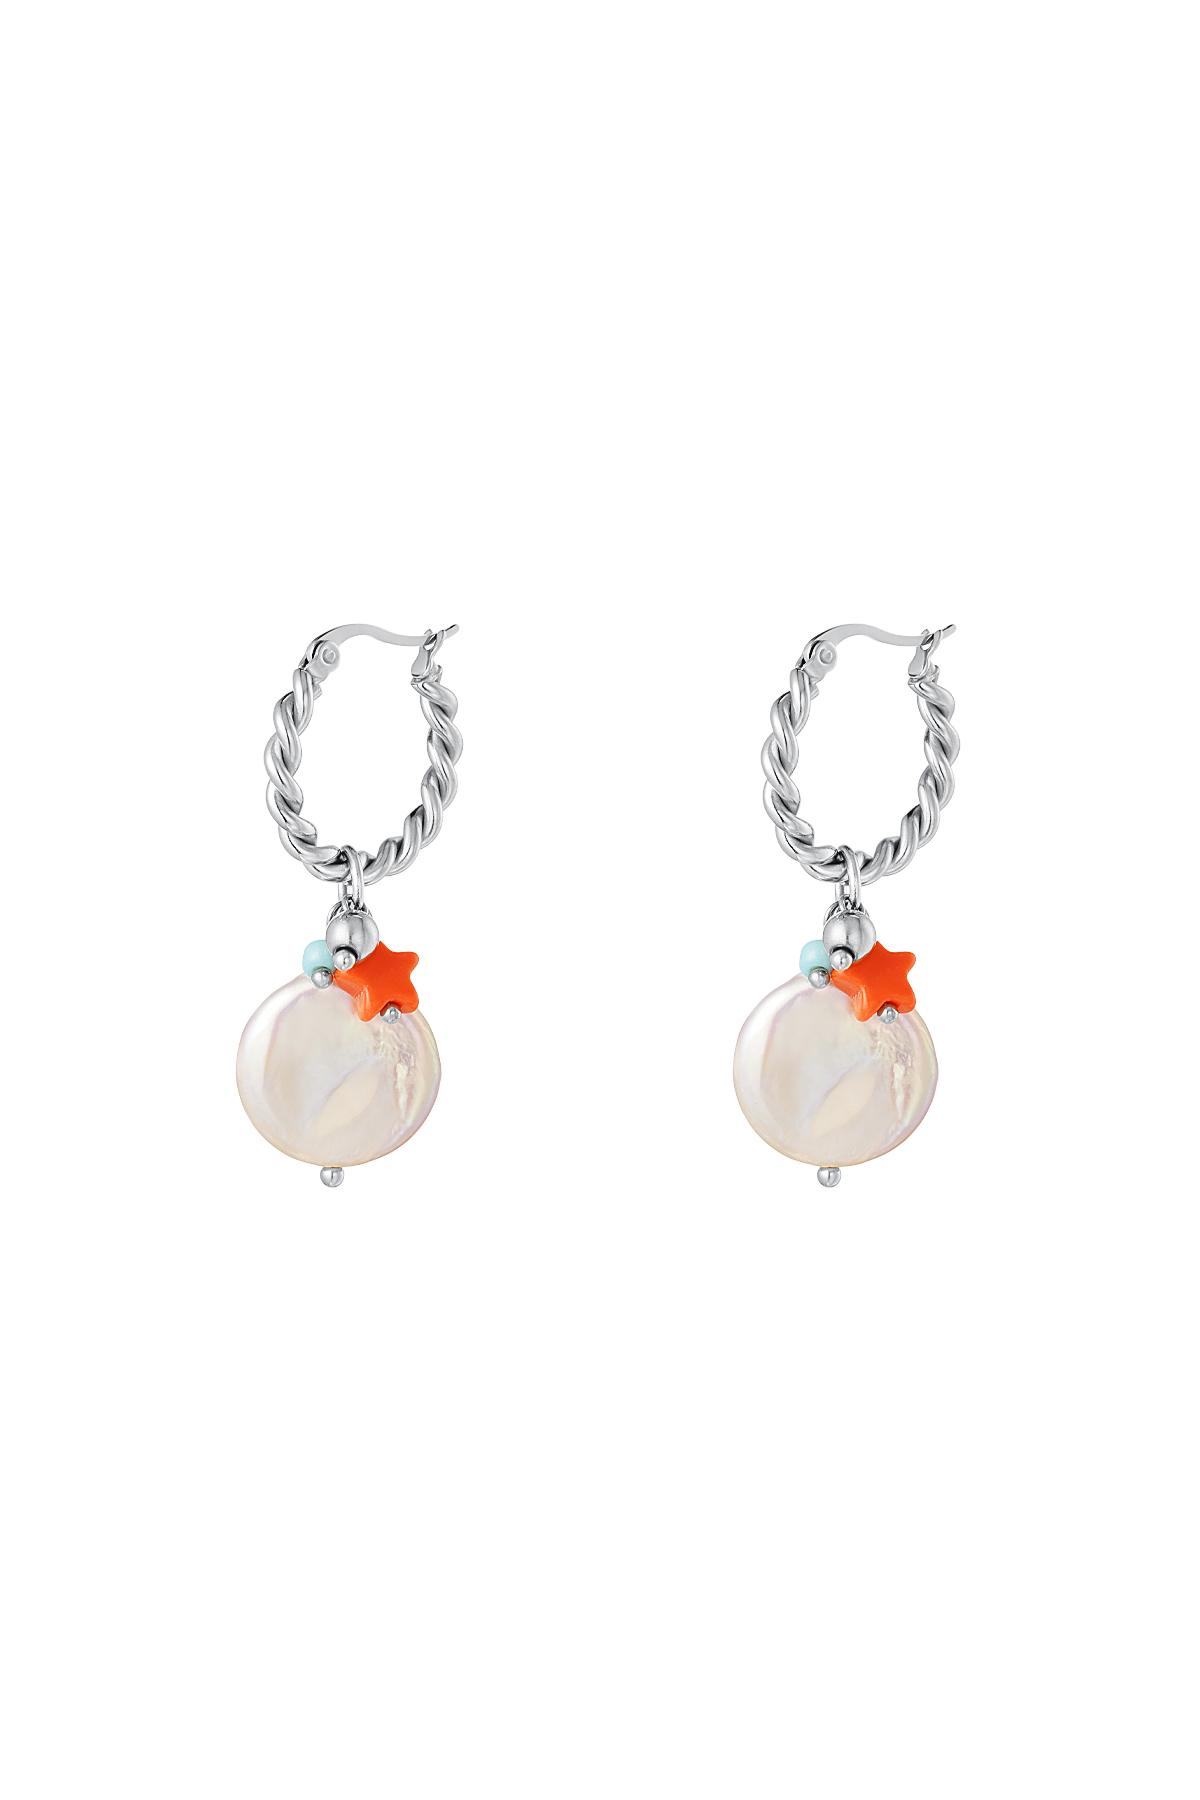 Dangling earrings - Beach collection Silver Stainless Steel